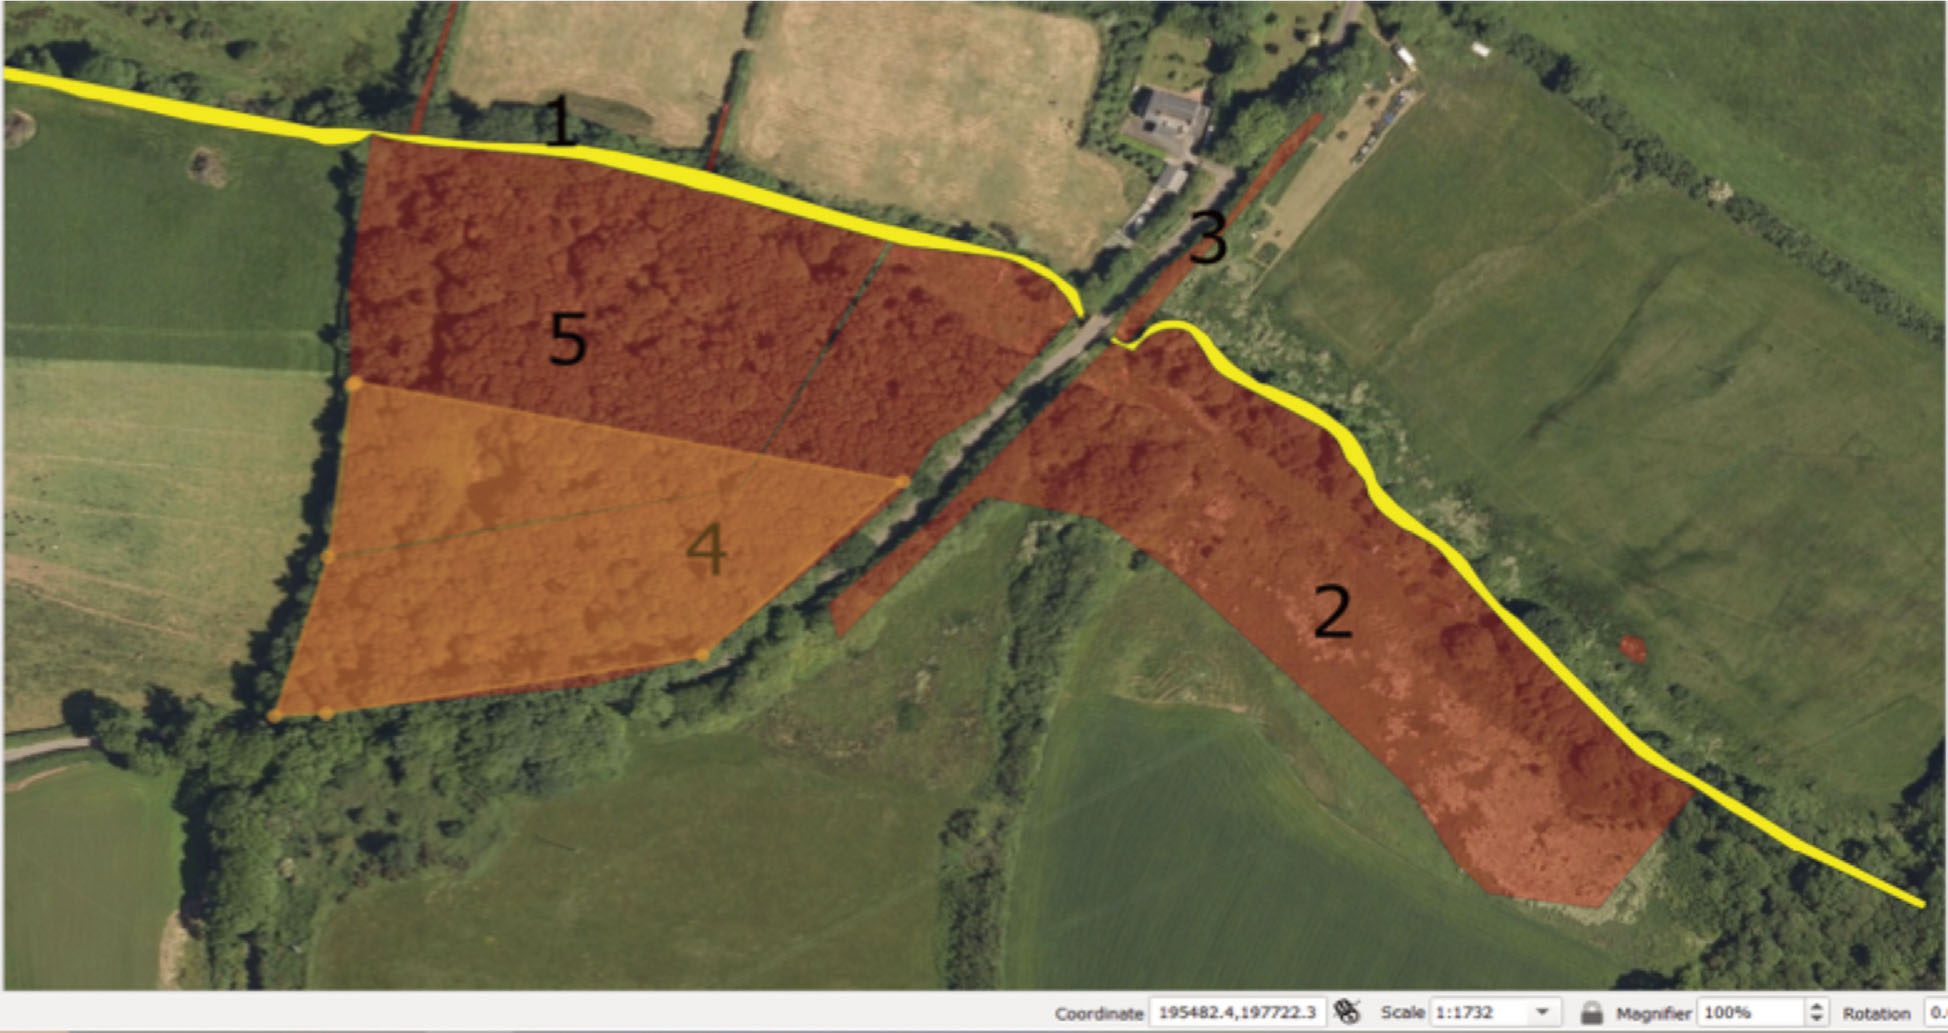 Map showing Chapel Hill, Castemartin Corse, total area of Himalayan balsam infestation: 28.45ha. Surrounding land use concentrates the Himalayan balsam infestation in deciduous woodland (polygons 4 and 5 - Chapel Hill wood - 90% density), marshy grassland/willow and scrub (polygon 2- 50% density) and roadside hedge (polygon 3 - 50% density). The Corse stream is highlighted in yellow.